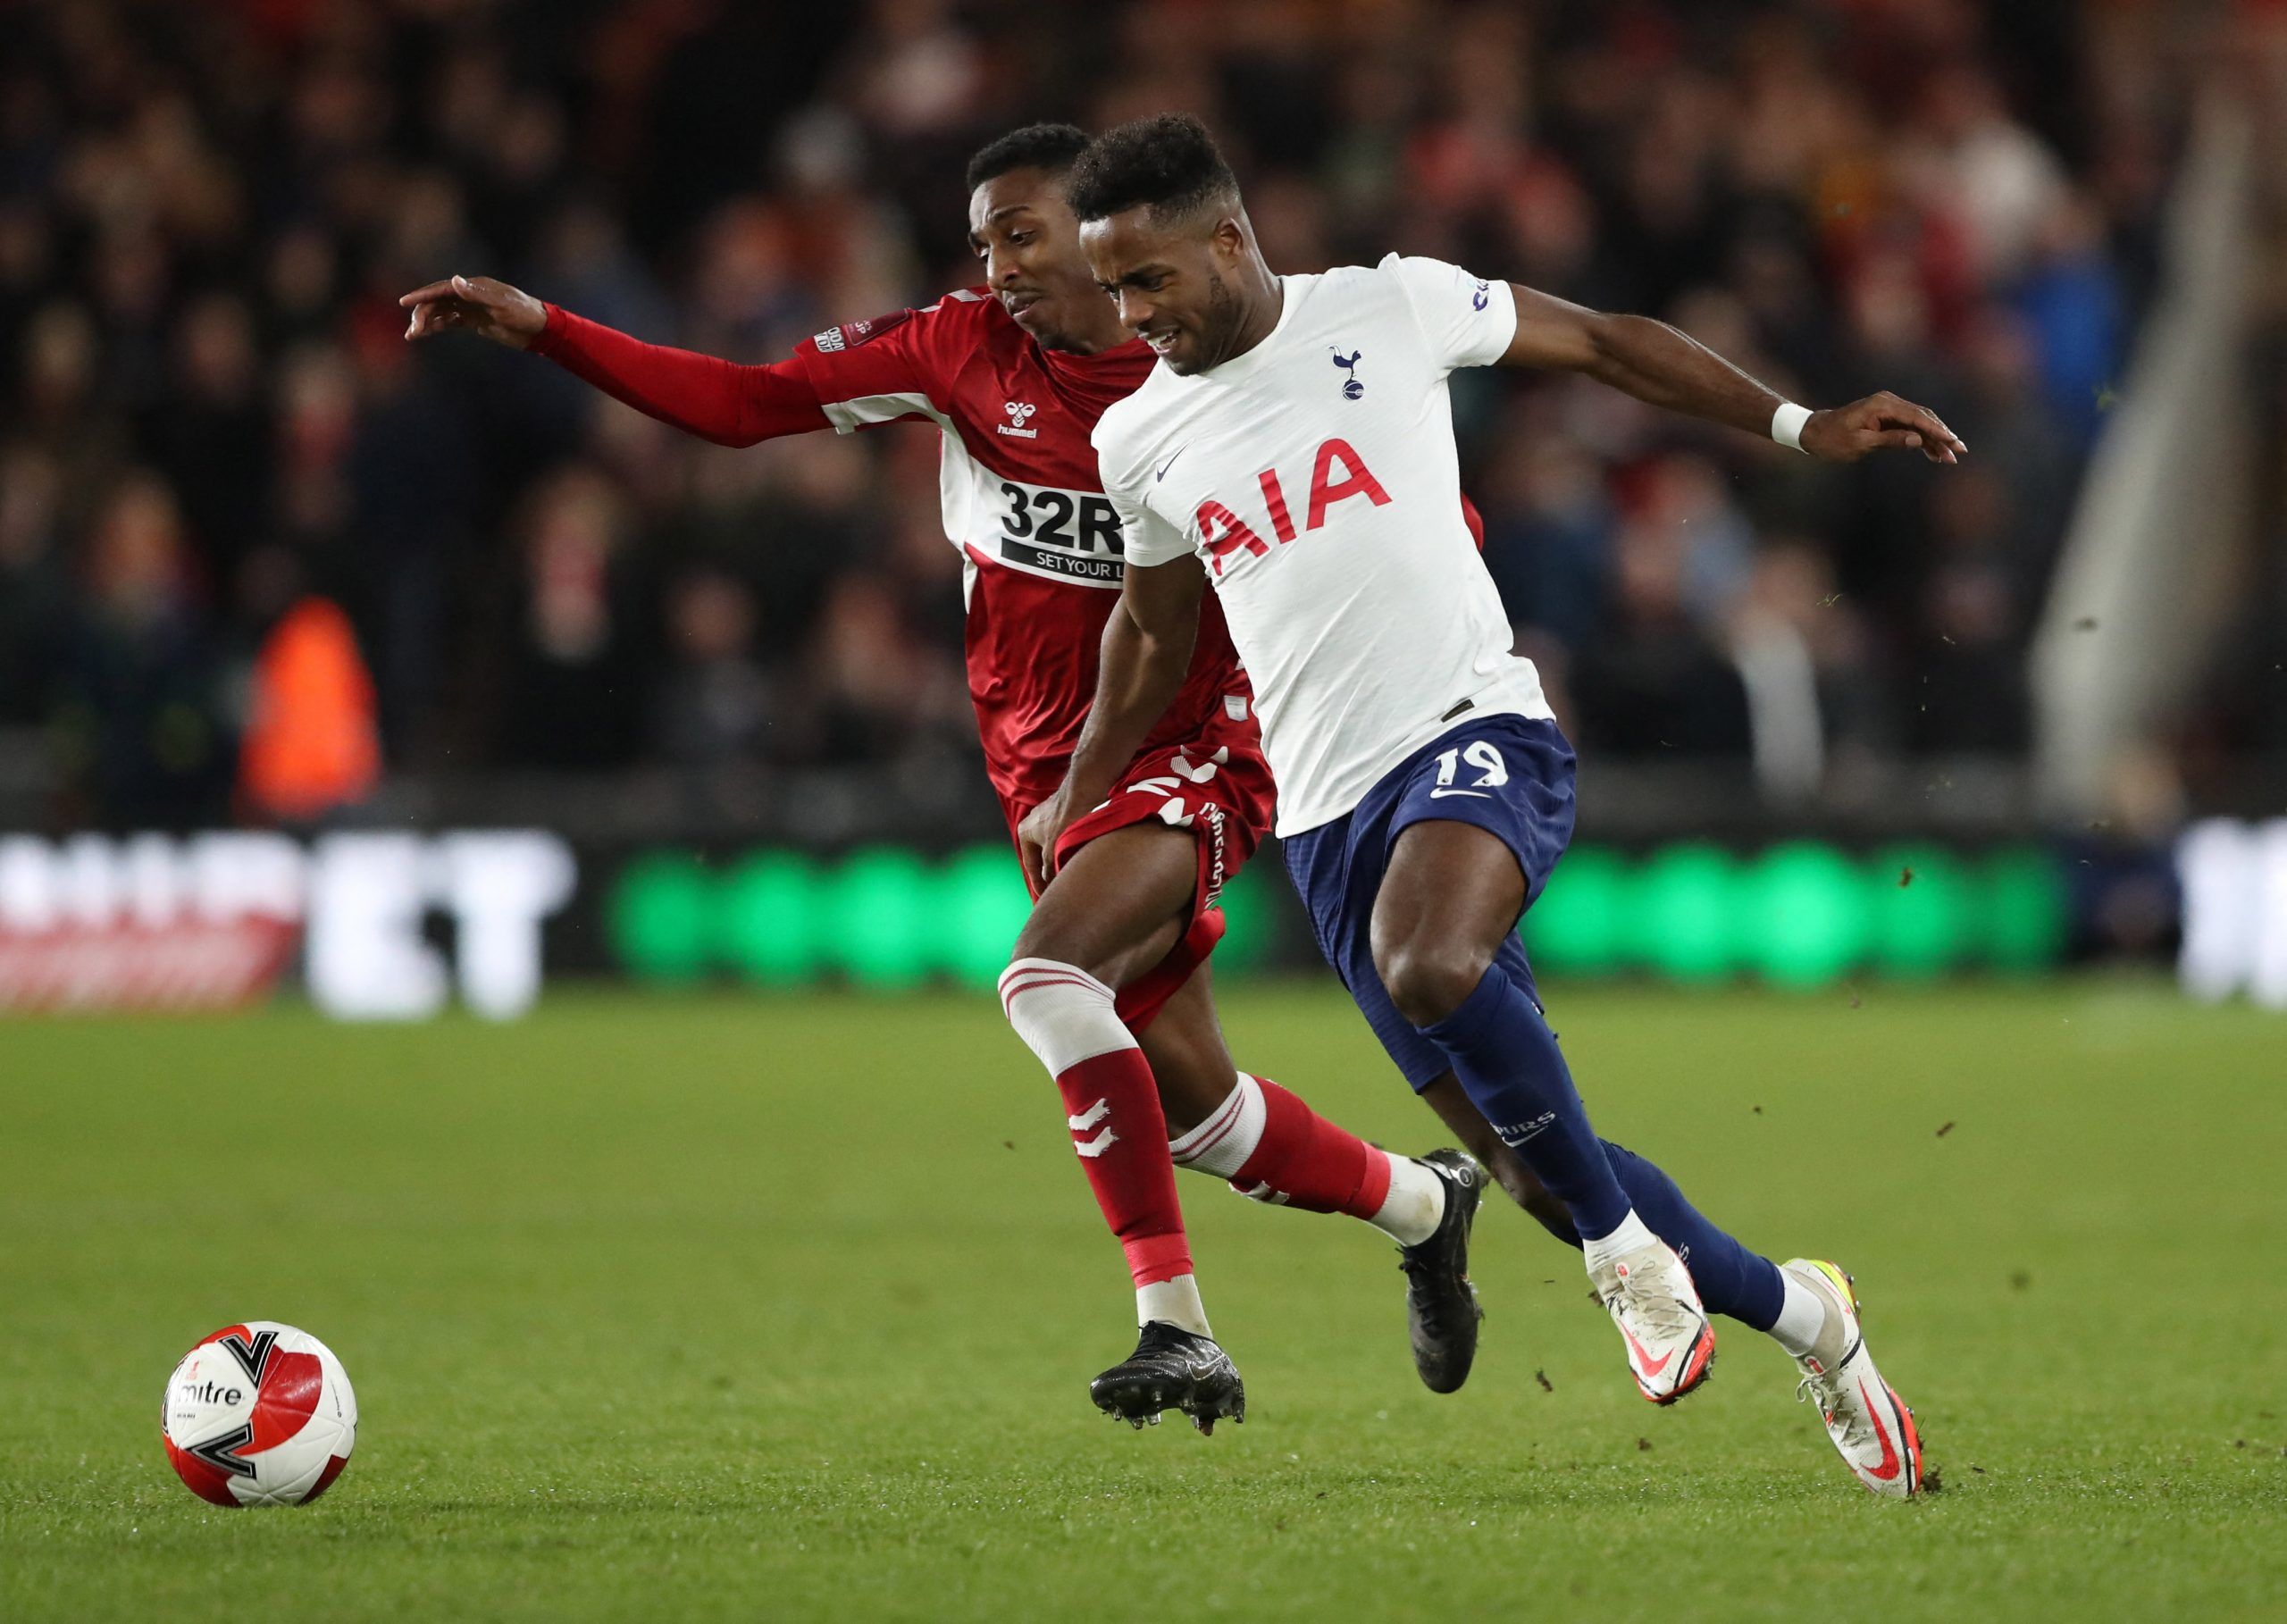 Soccer Football - FA Cup Fifth Round - Middlesbrough v Tottenham Hotspur - Riverside Stadium, Middlesbrough, Britain - March 1, 2022 Tottenham Hotspur's Ryan Sessegnon in action with Middlesbrough's Isaiah Jones REUTERS/Scott Heppell